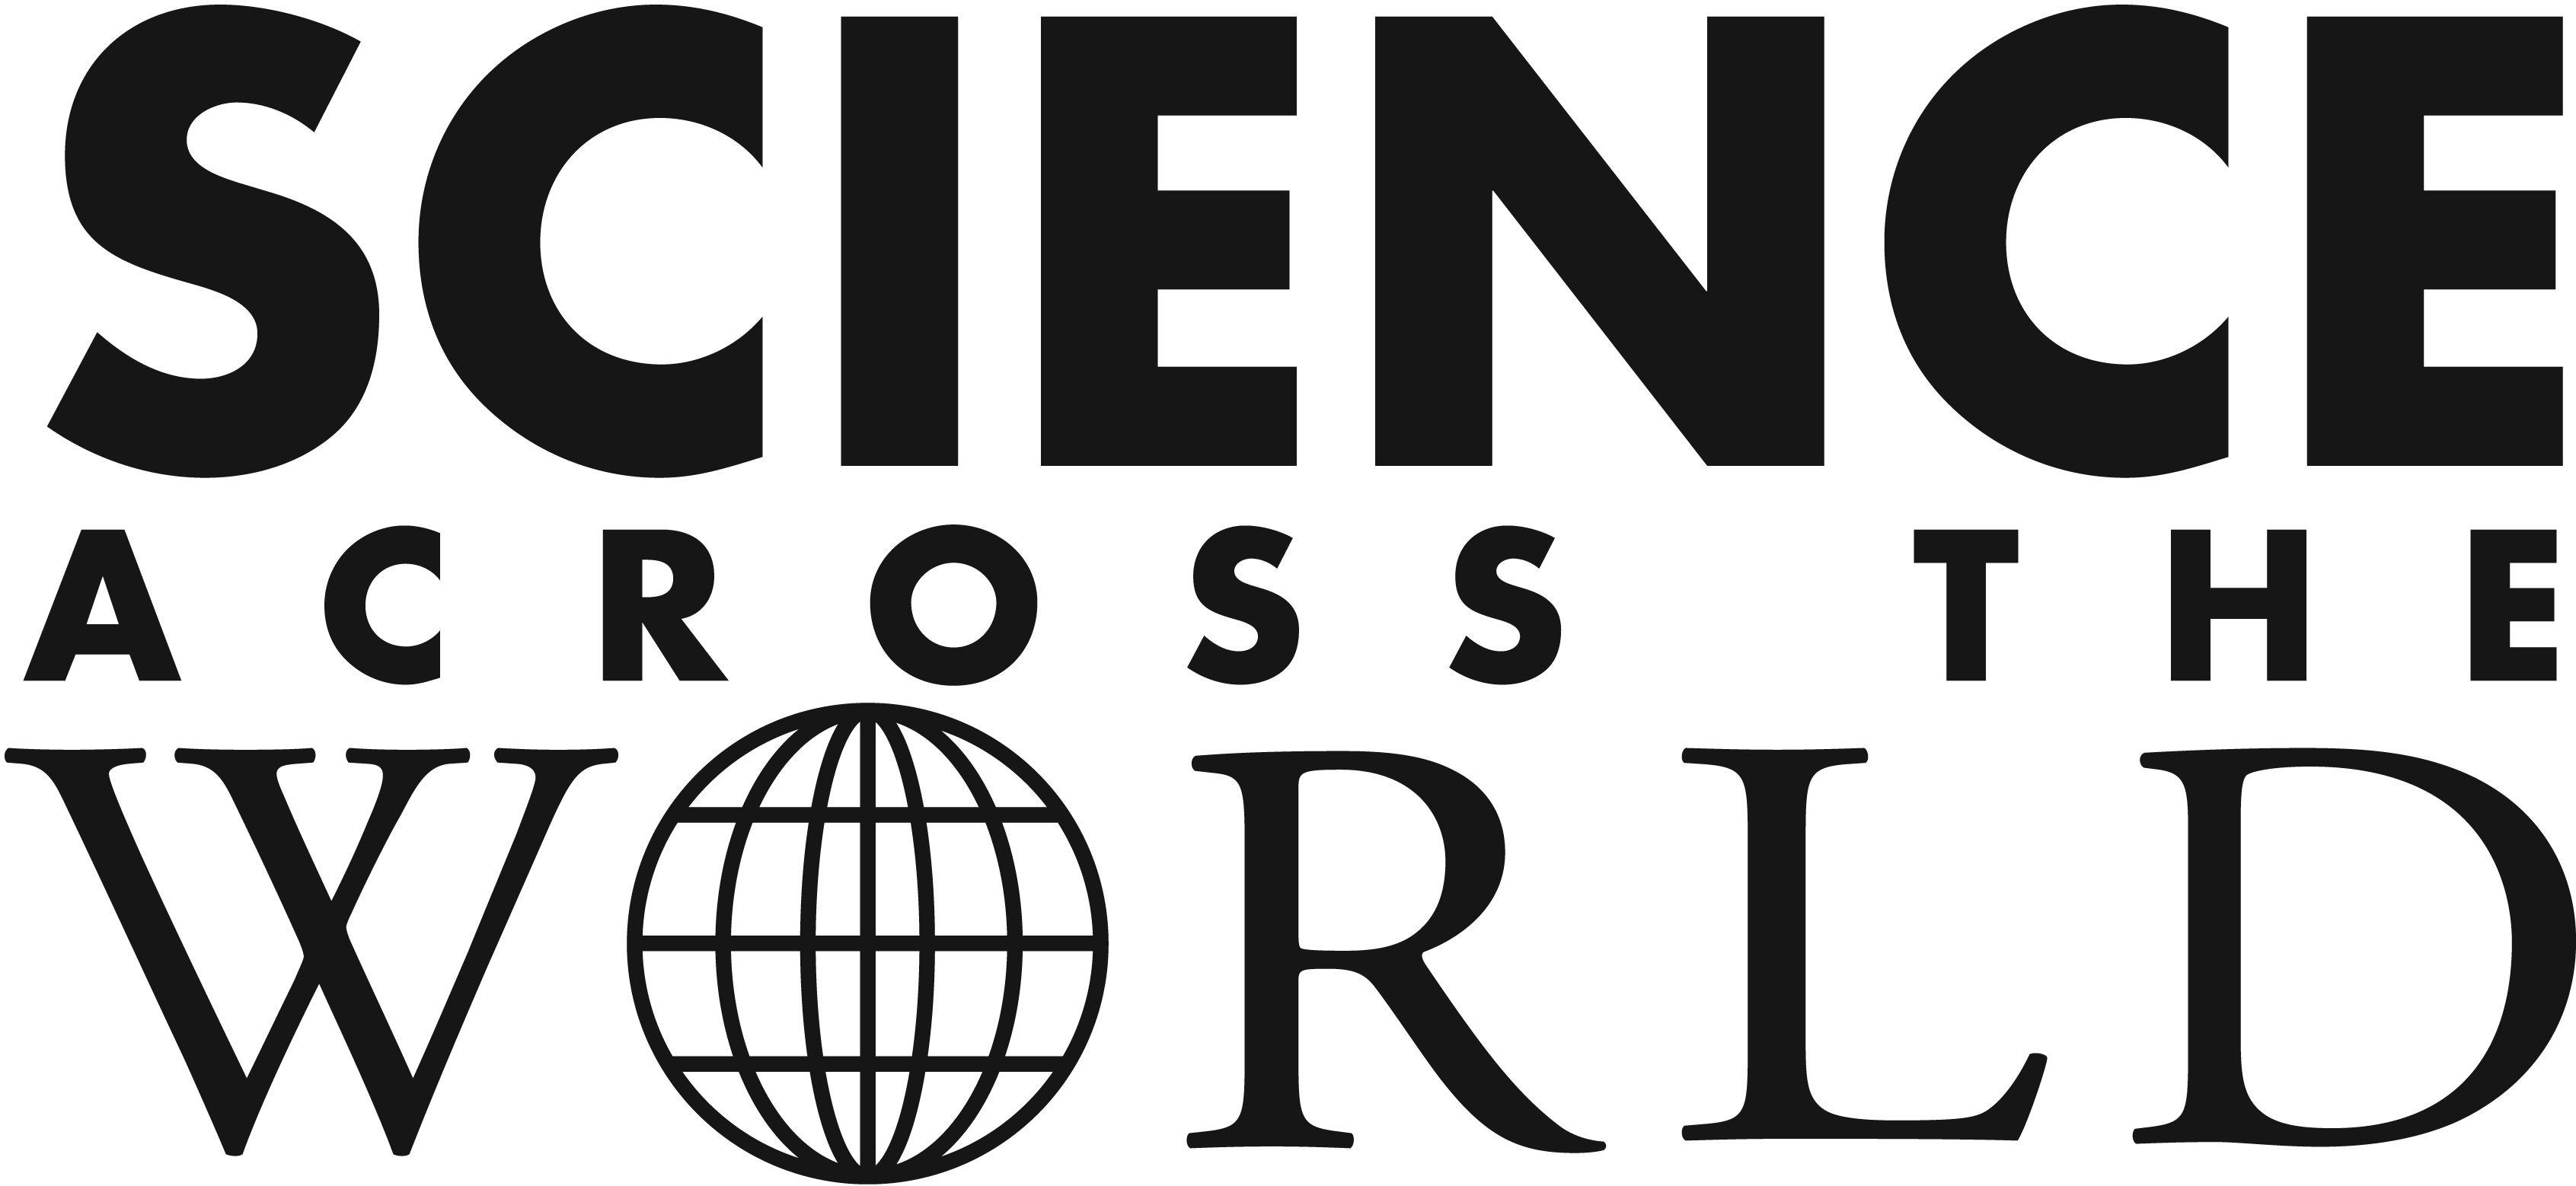 Across the World Logo - Science Across the World | UIA Yearbook Profile | Union of ...